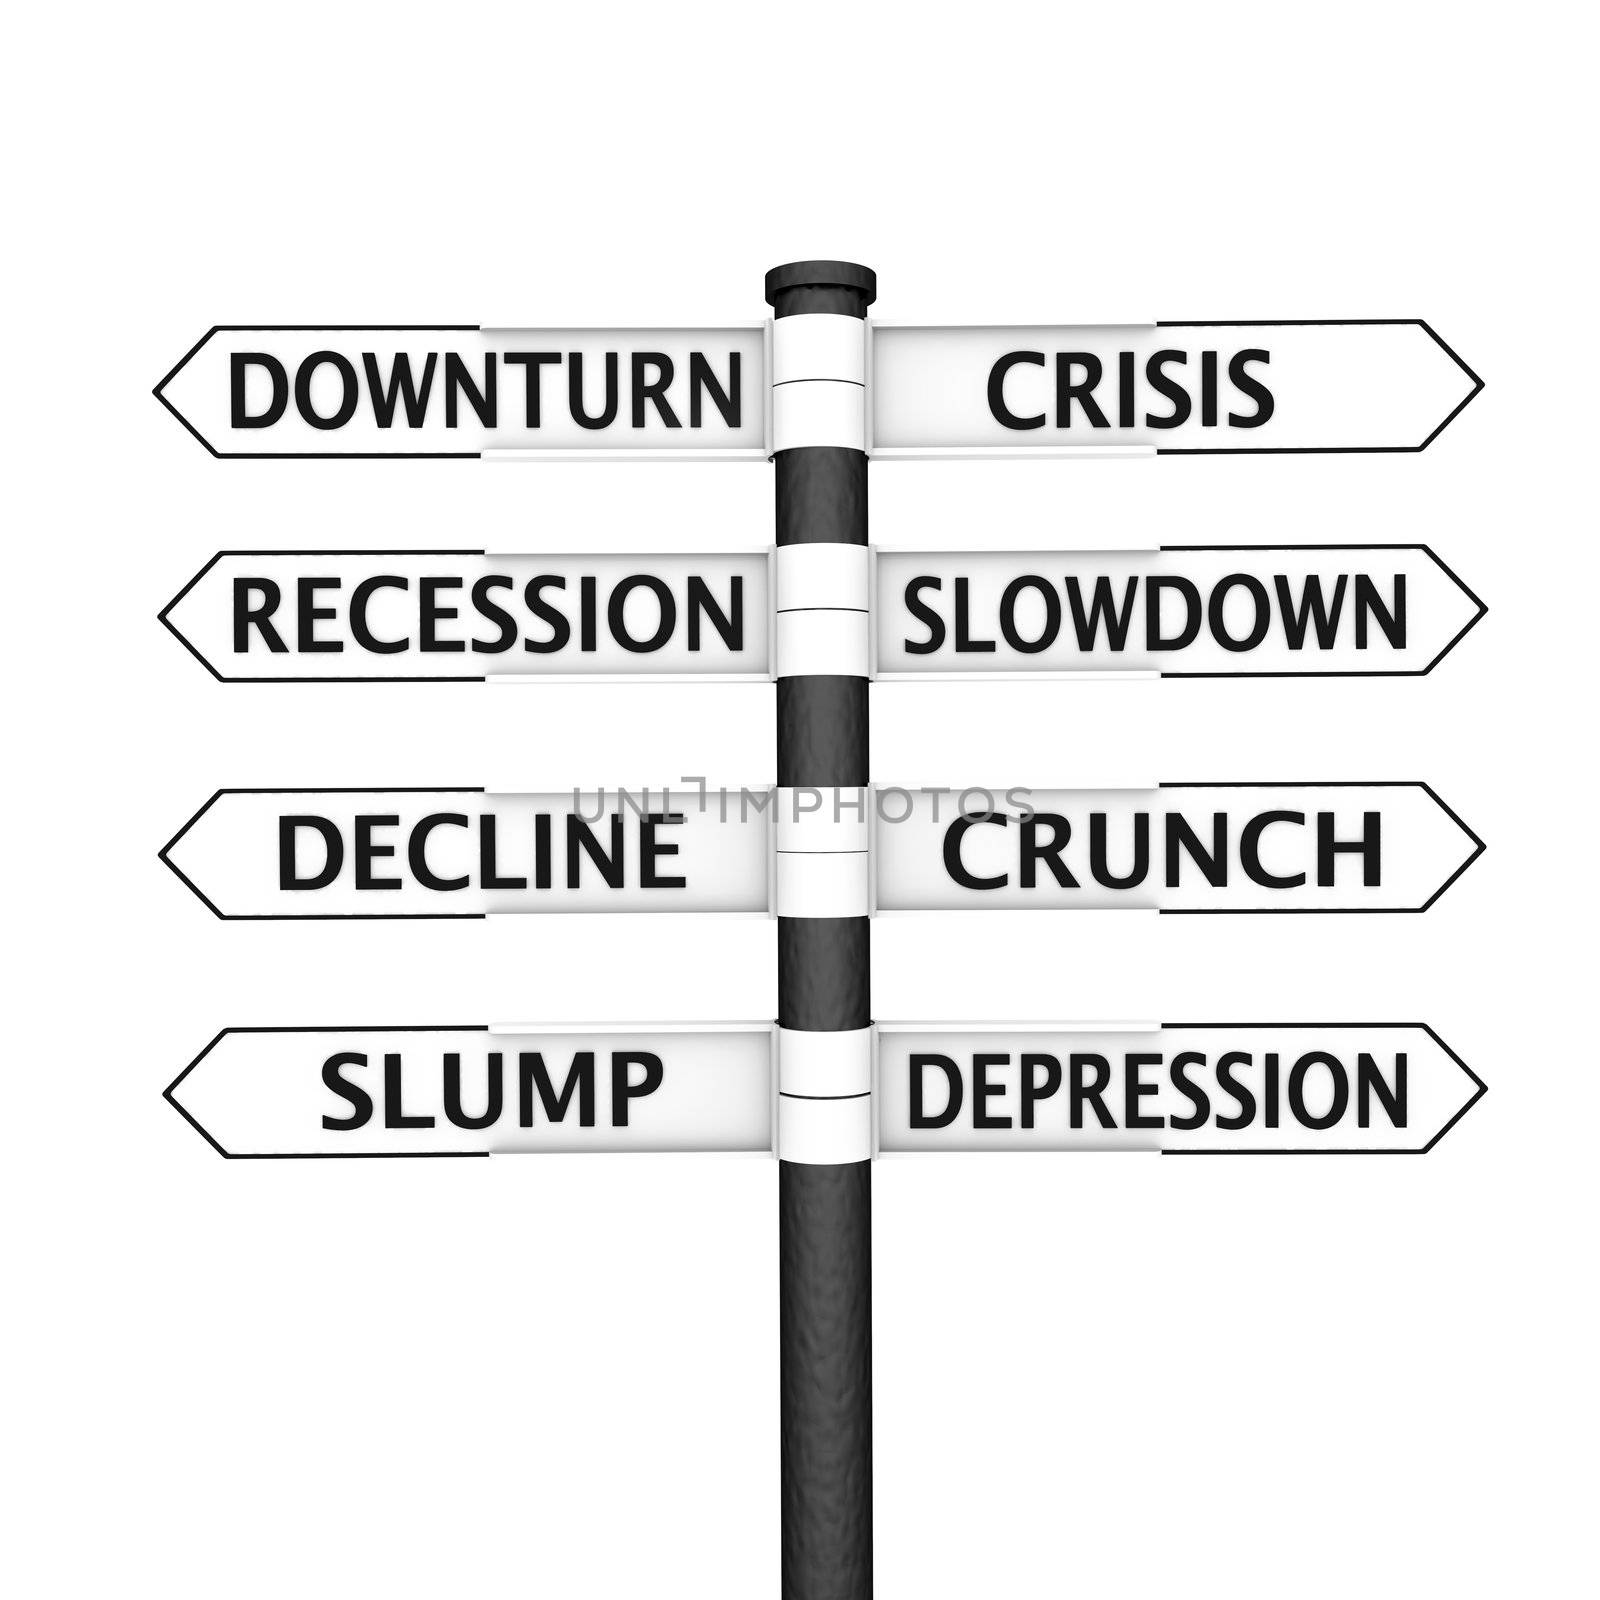 Crisis signpost by Harvepino